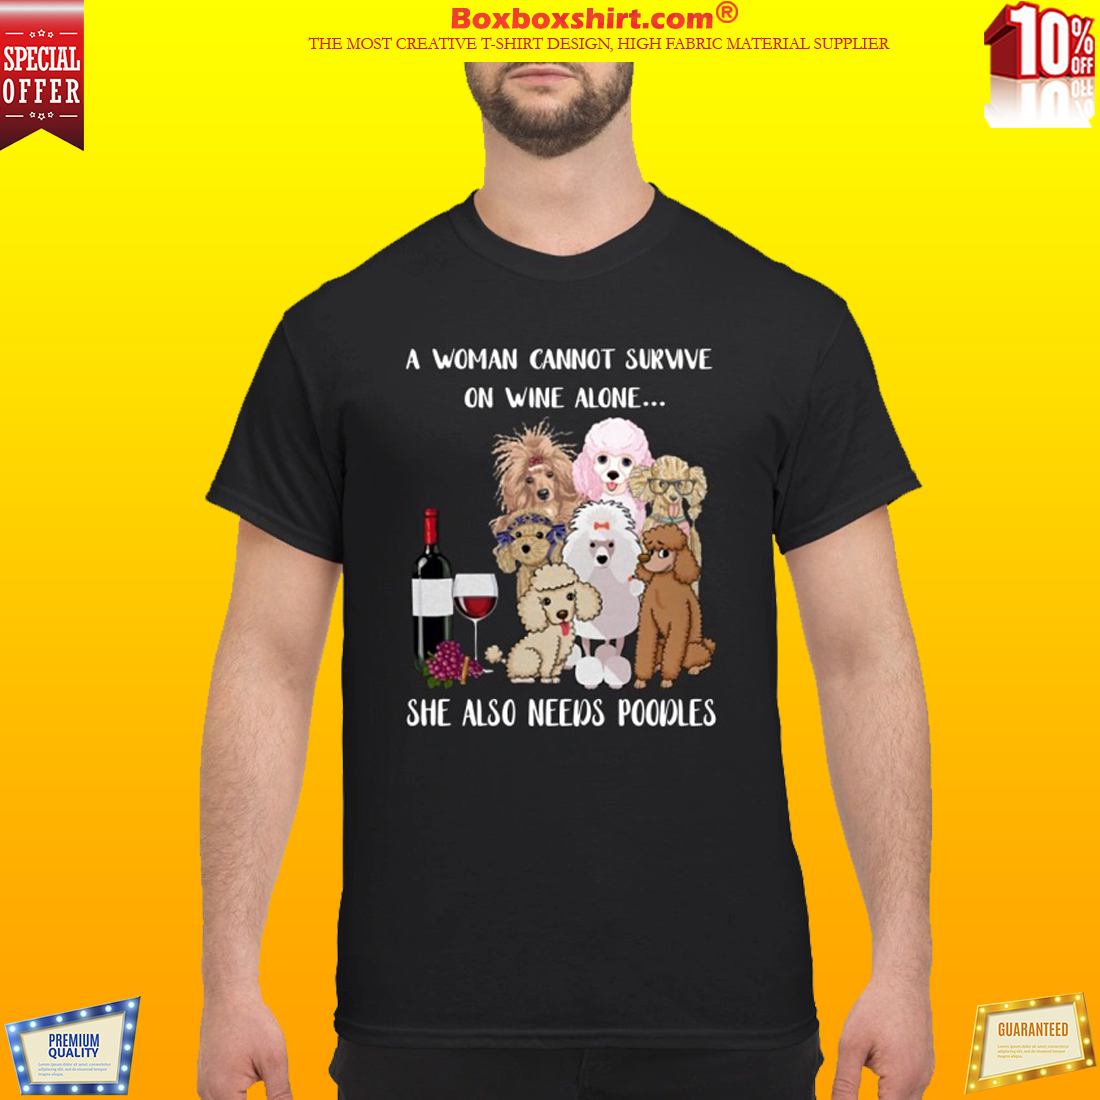 A woman cannot survive on wine alone she also needs poodles classic shirt